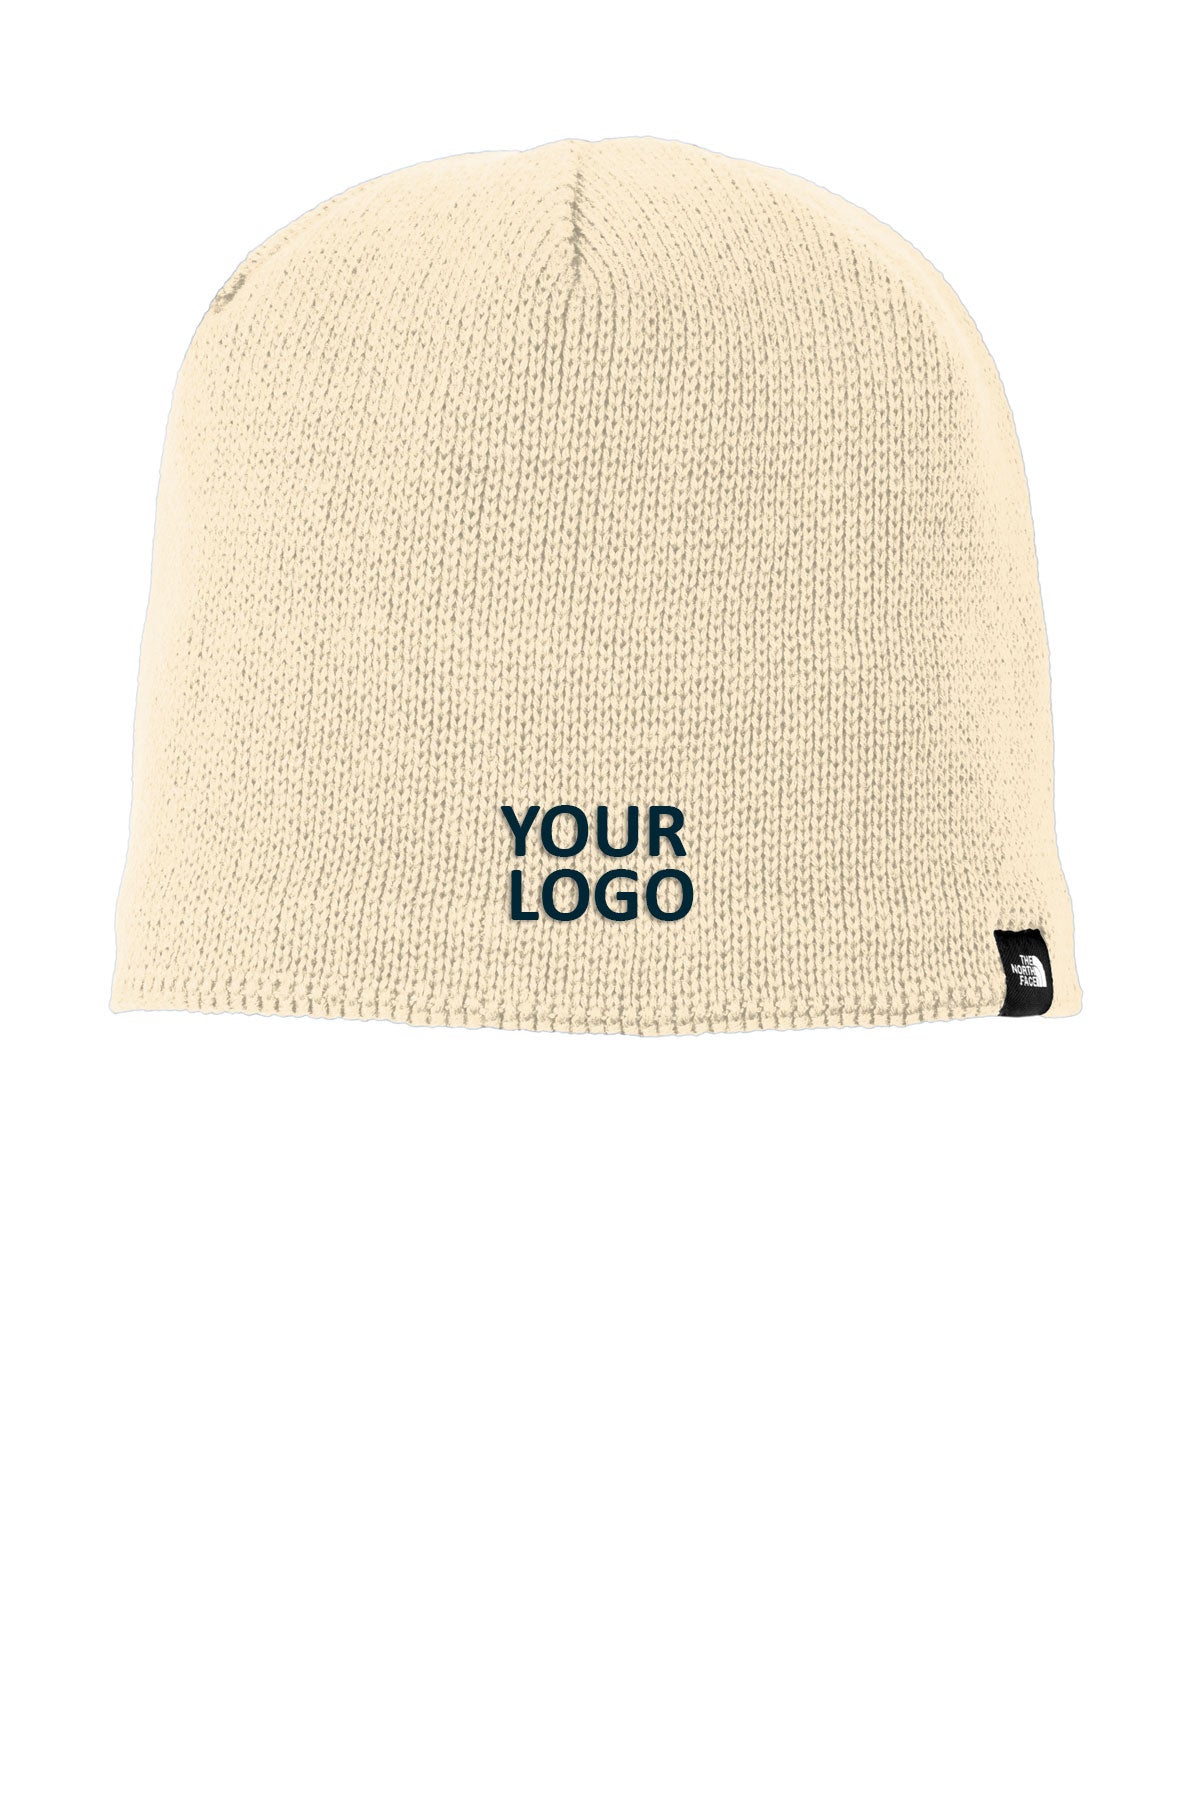 The North Face Vintage White NF0A4VUB The-North-Face-Mountain-Beanie-NF0A4VUB-Vintage-White